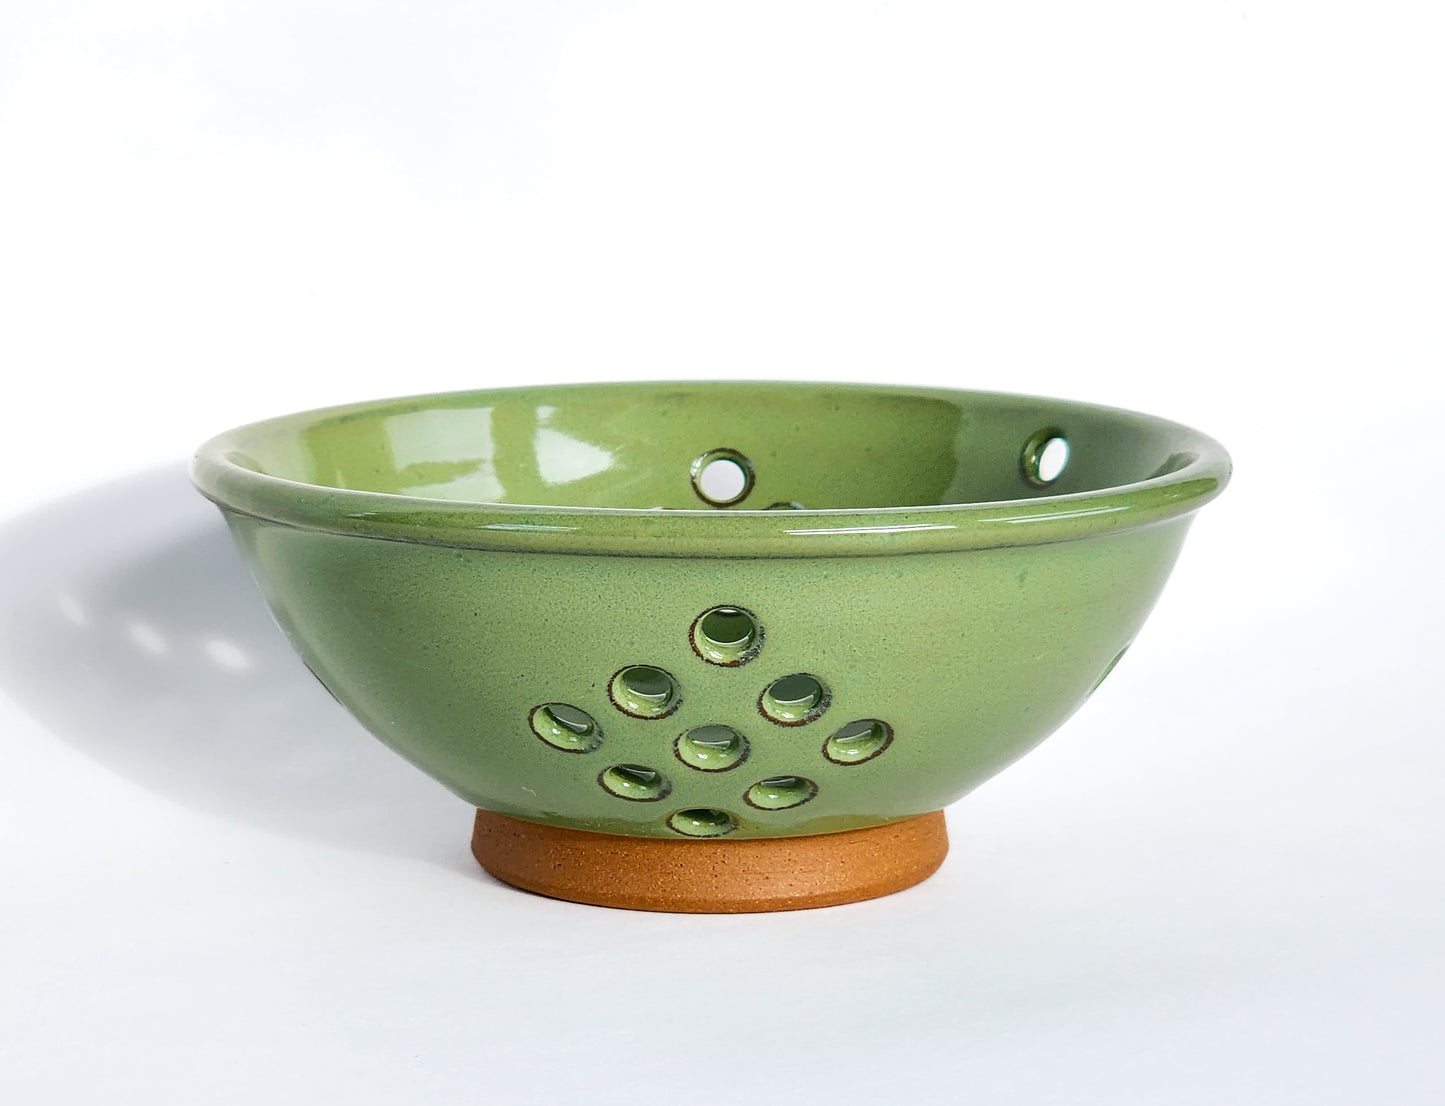 Image: Clinton Pottery's Handmade Small Colander in Bud Green – A charming 2.25 cup colander, expertly crafted to embody the freshness of spring. Ideal for washing berries and smaller items, this soothing Bud Green piece seamlessly combines style with functionality. Machine washable for convenience, it's the perfect choice for those who appreciate practicality and aesthetics in a vibrant hue that captures the essence of the warmer seasons.